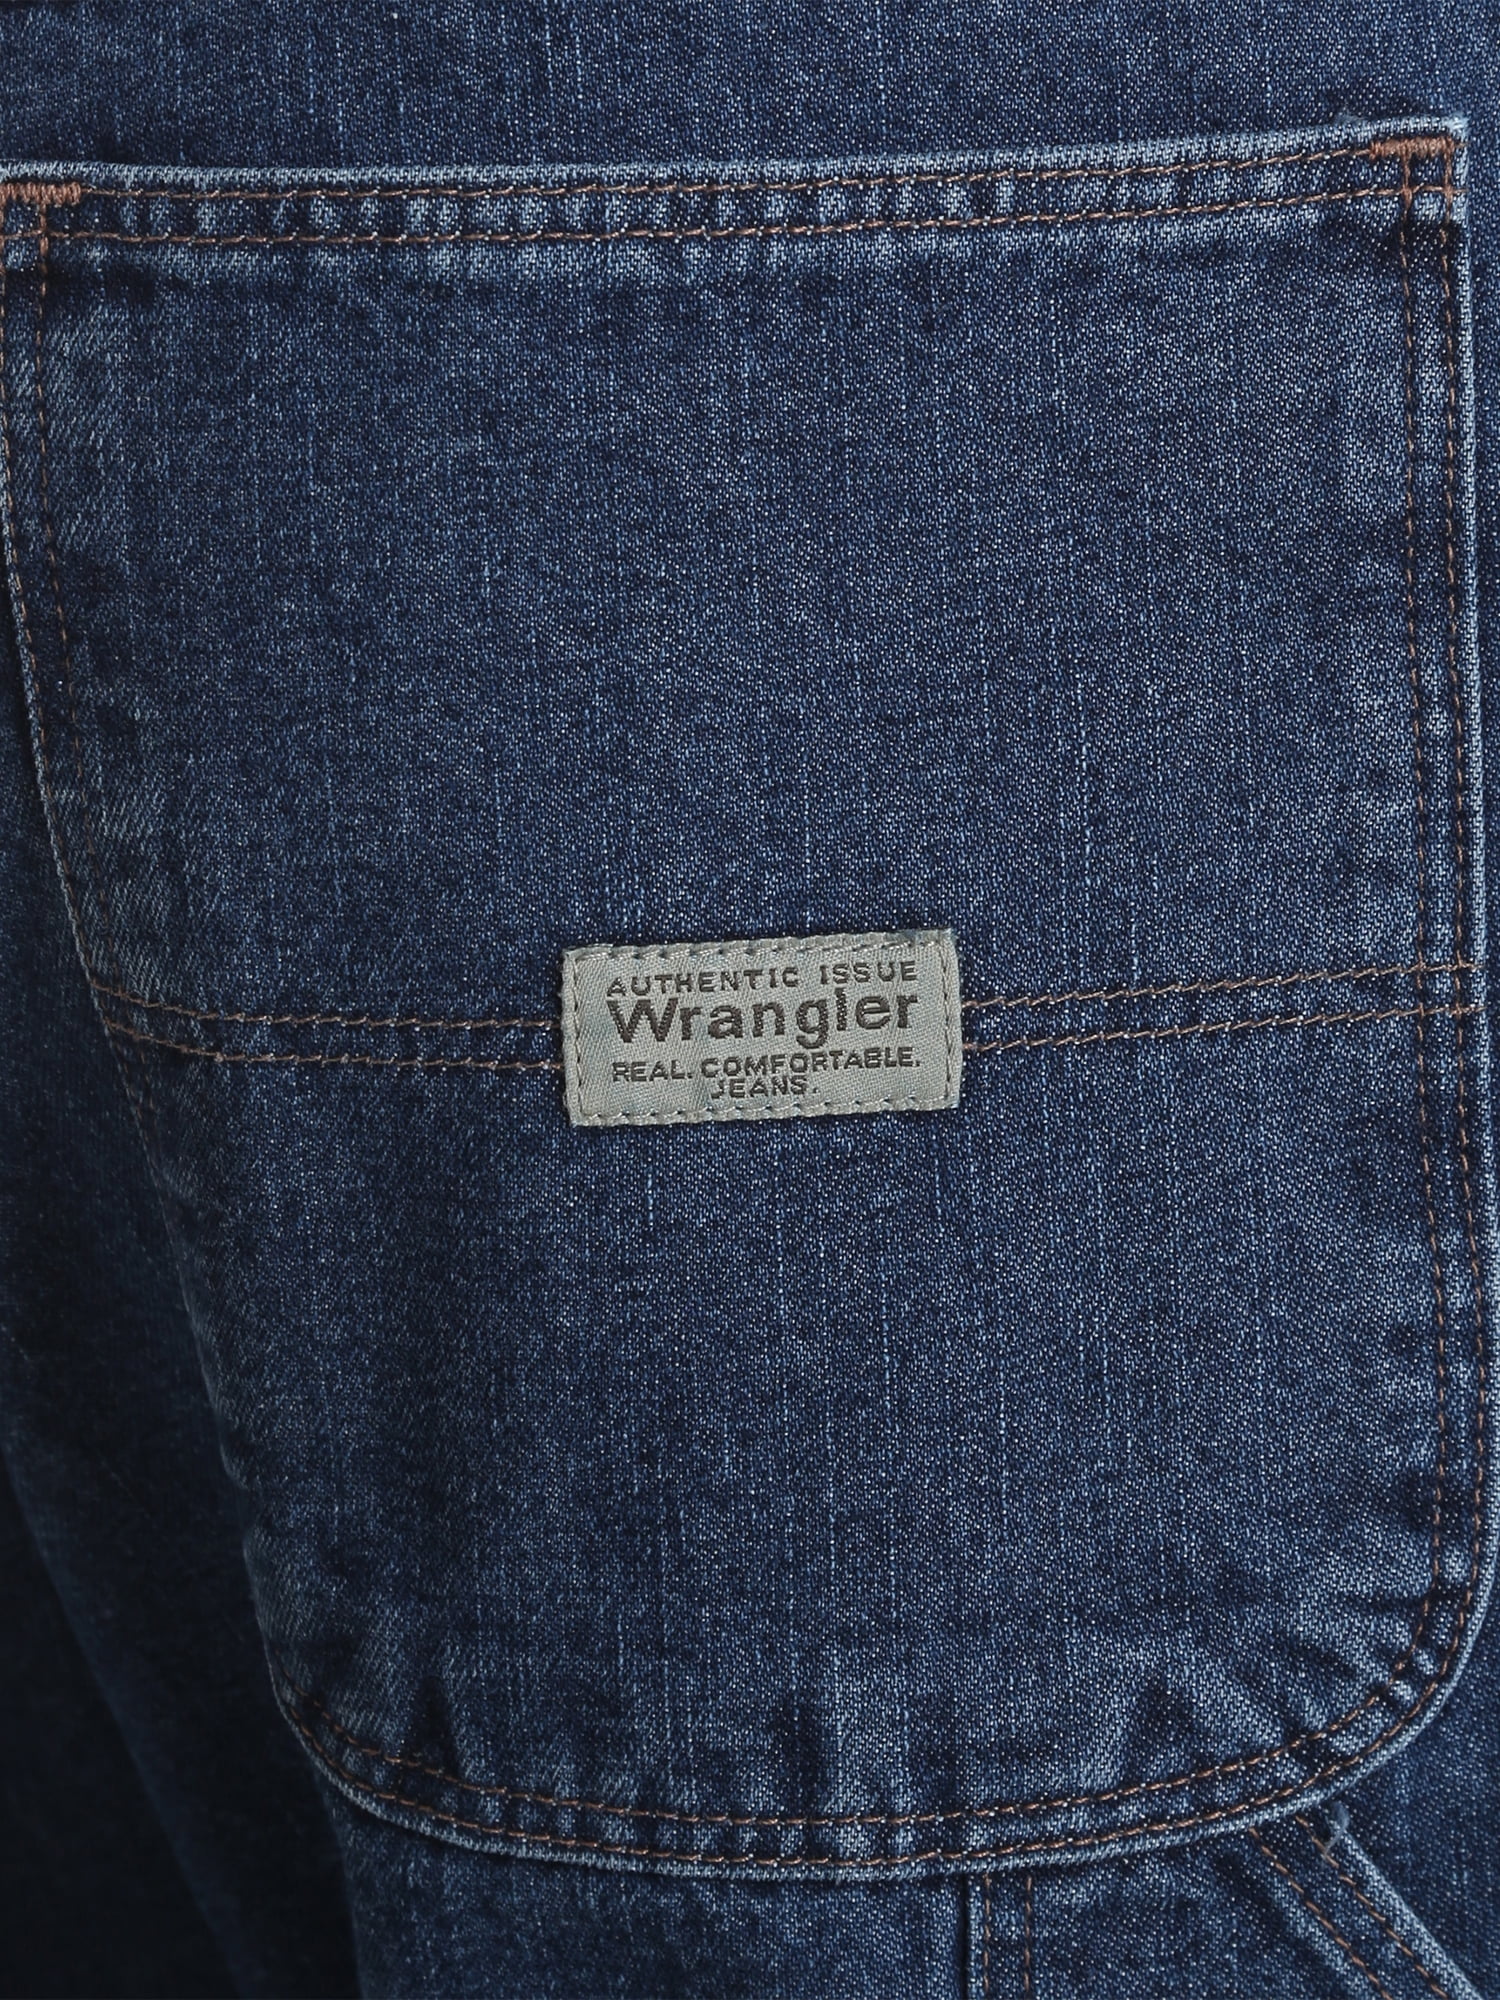 wrangler real comfortable jeans